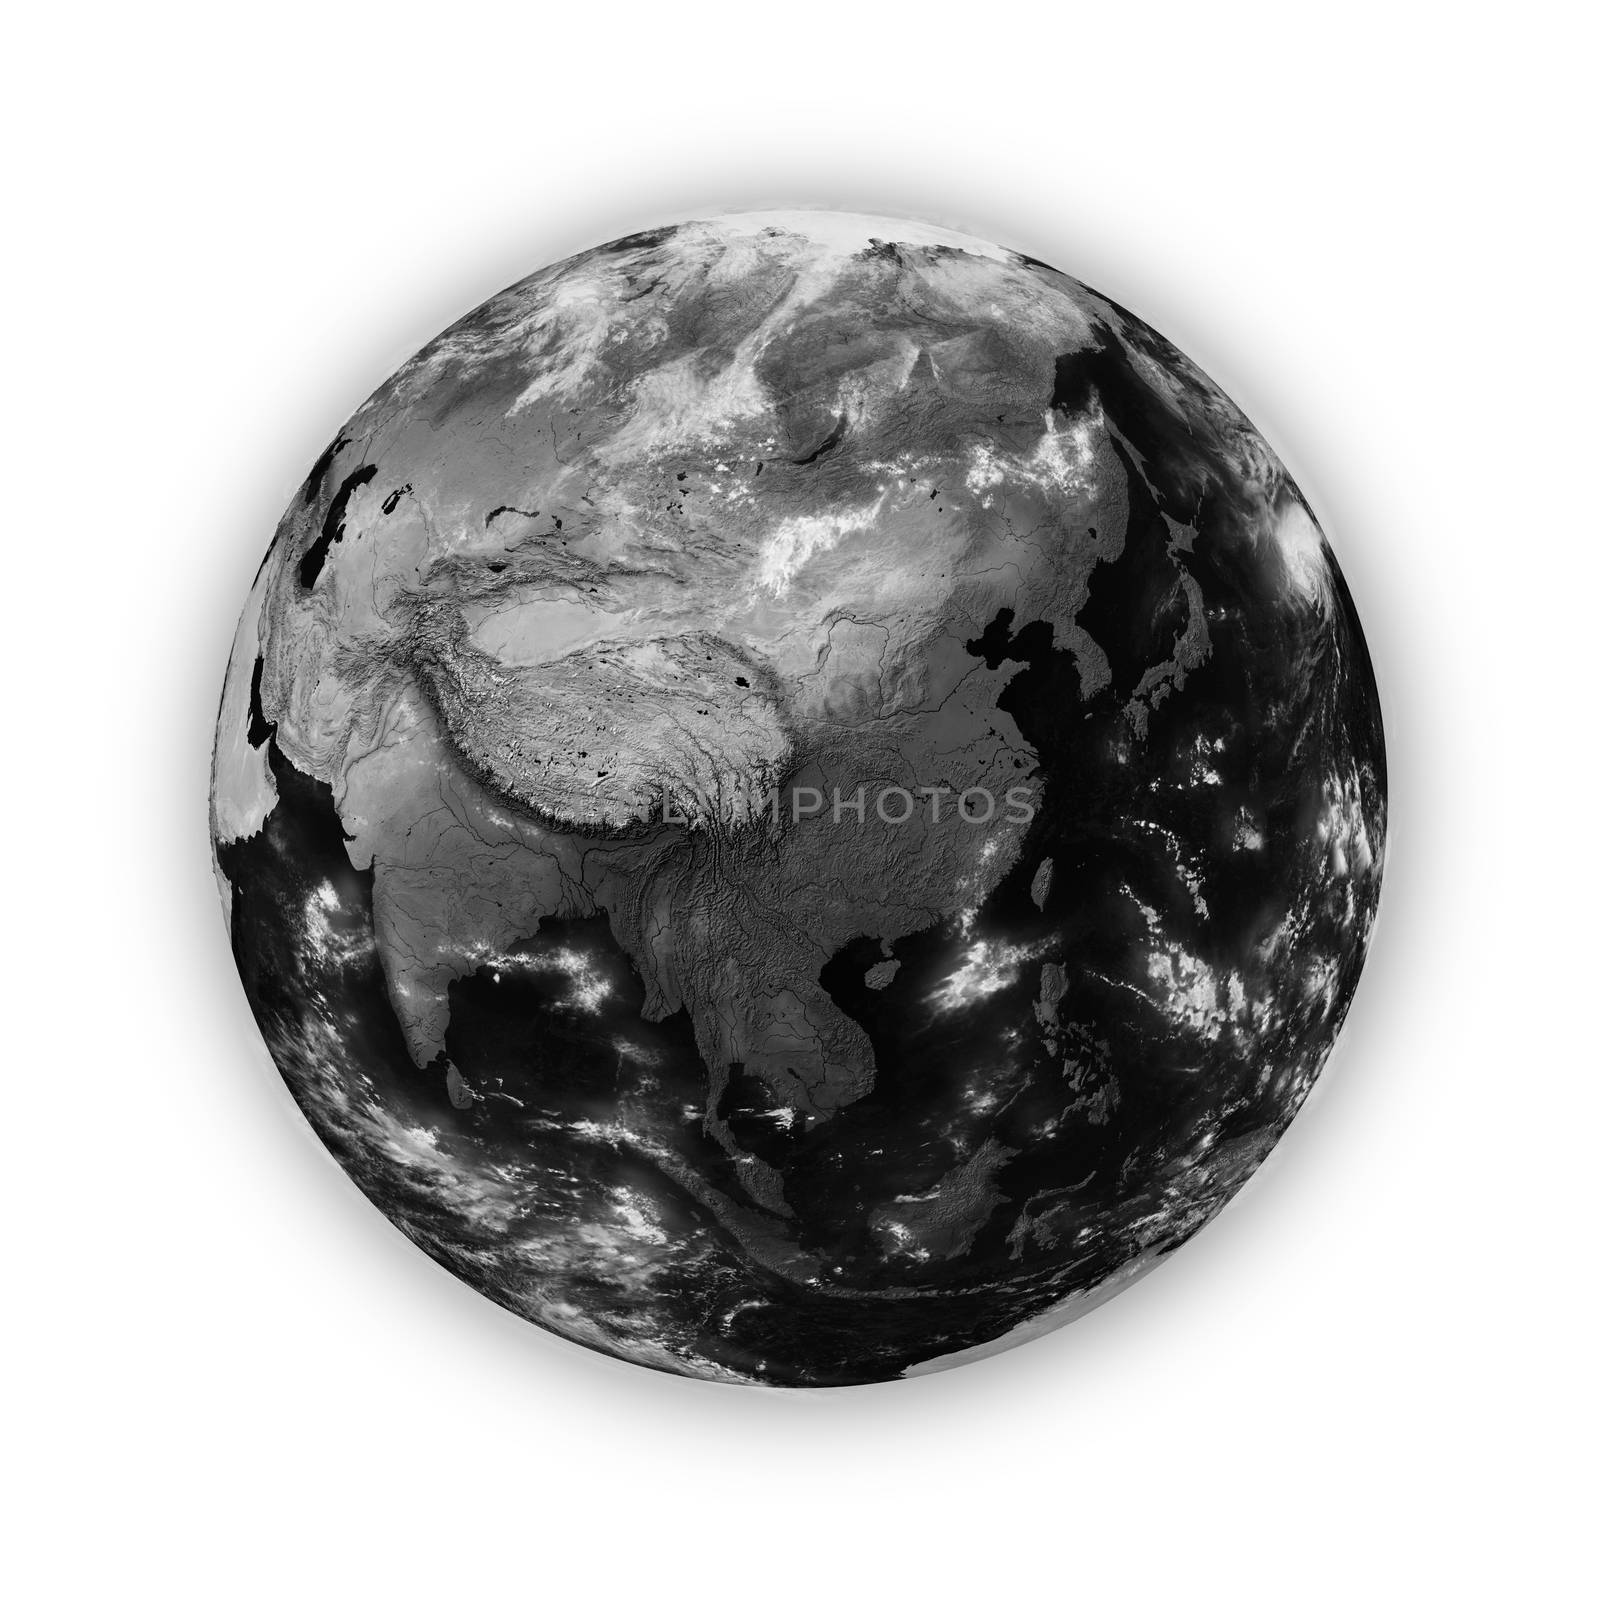 Southeast Asia on dark planet Earth isolated on white background. Highly detailed planet surface. Elements of this image furnished by NASA.